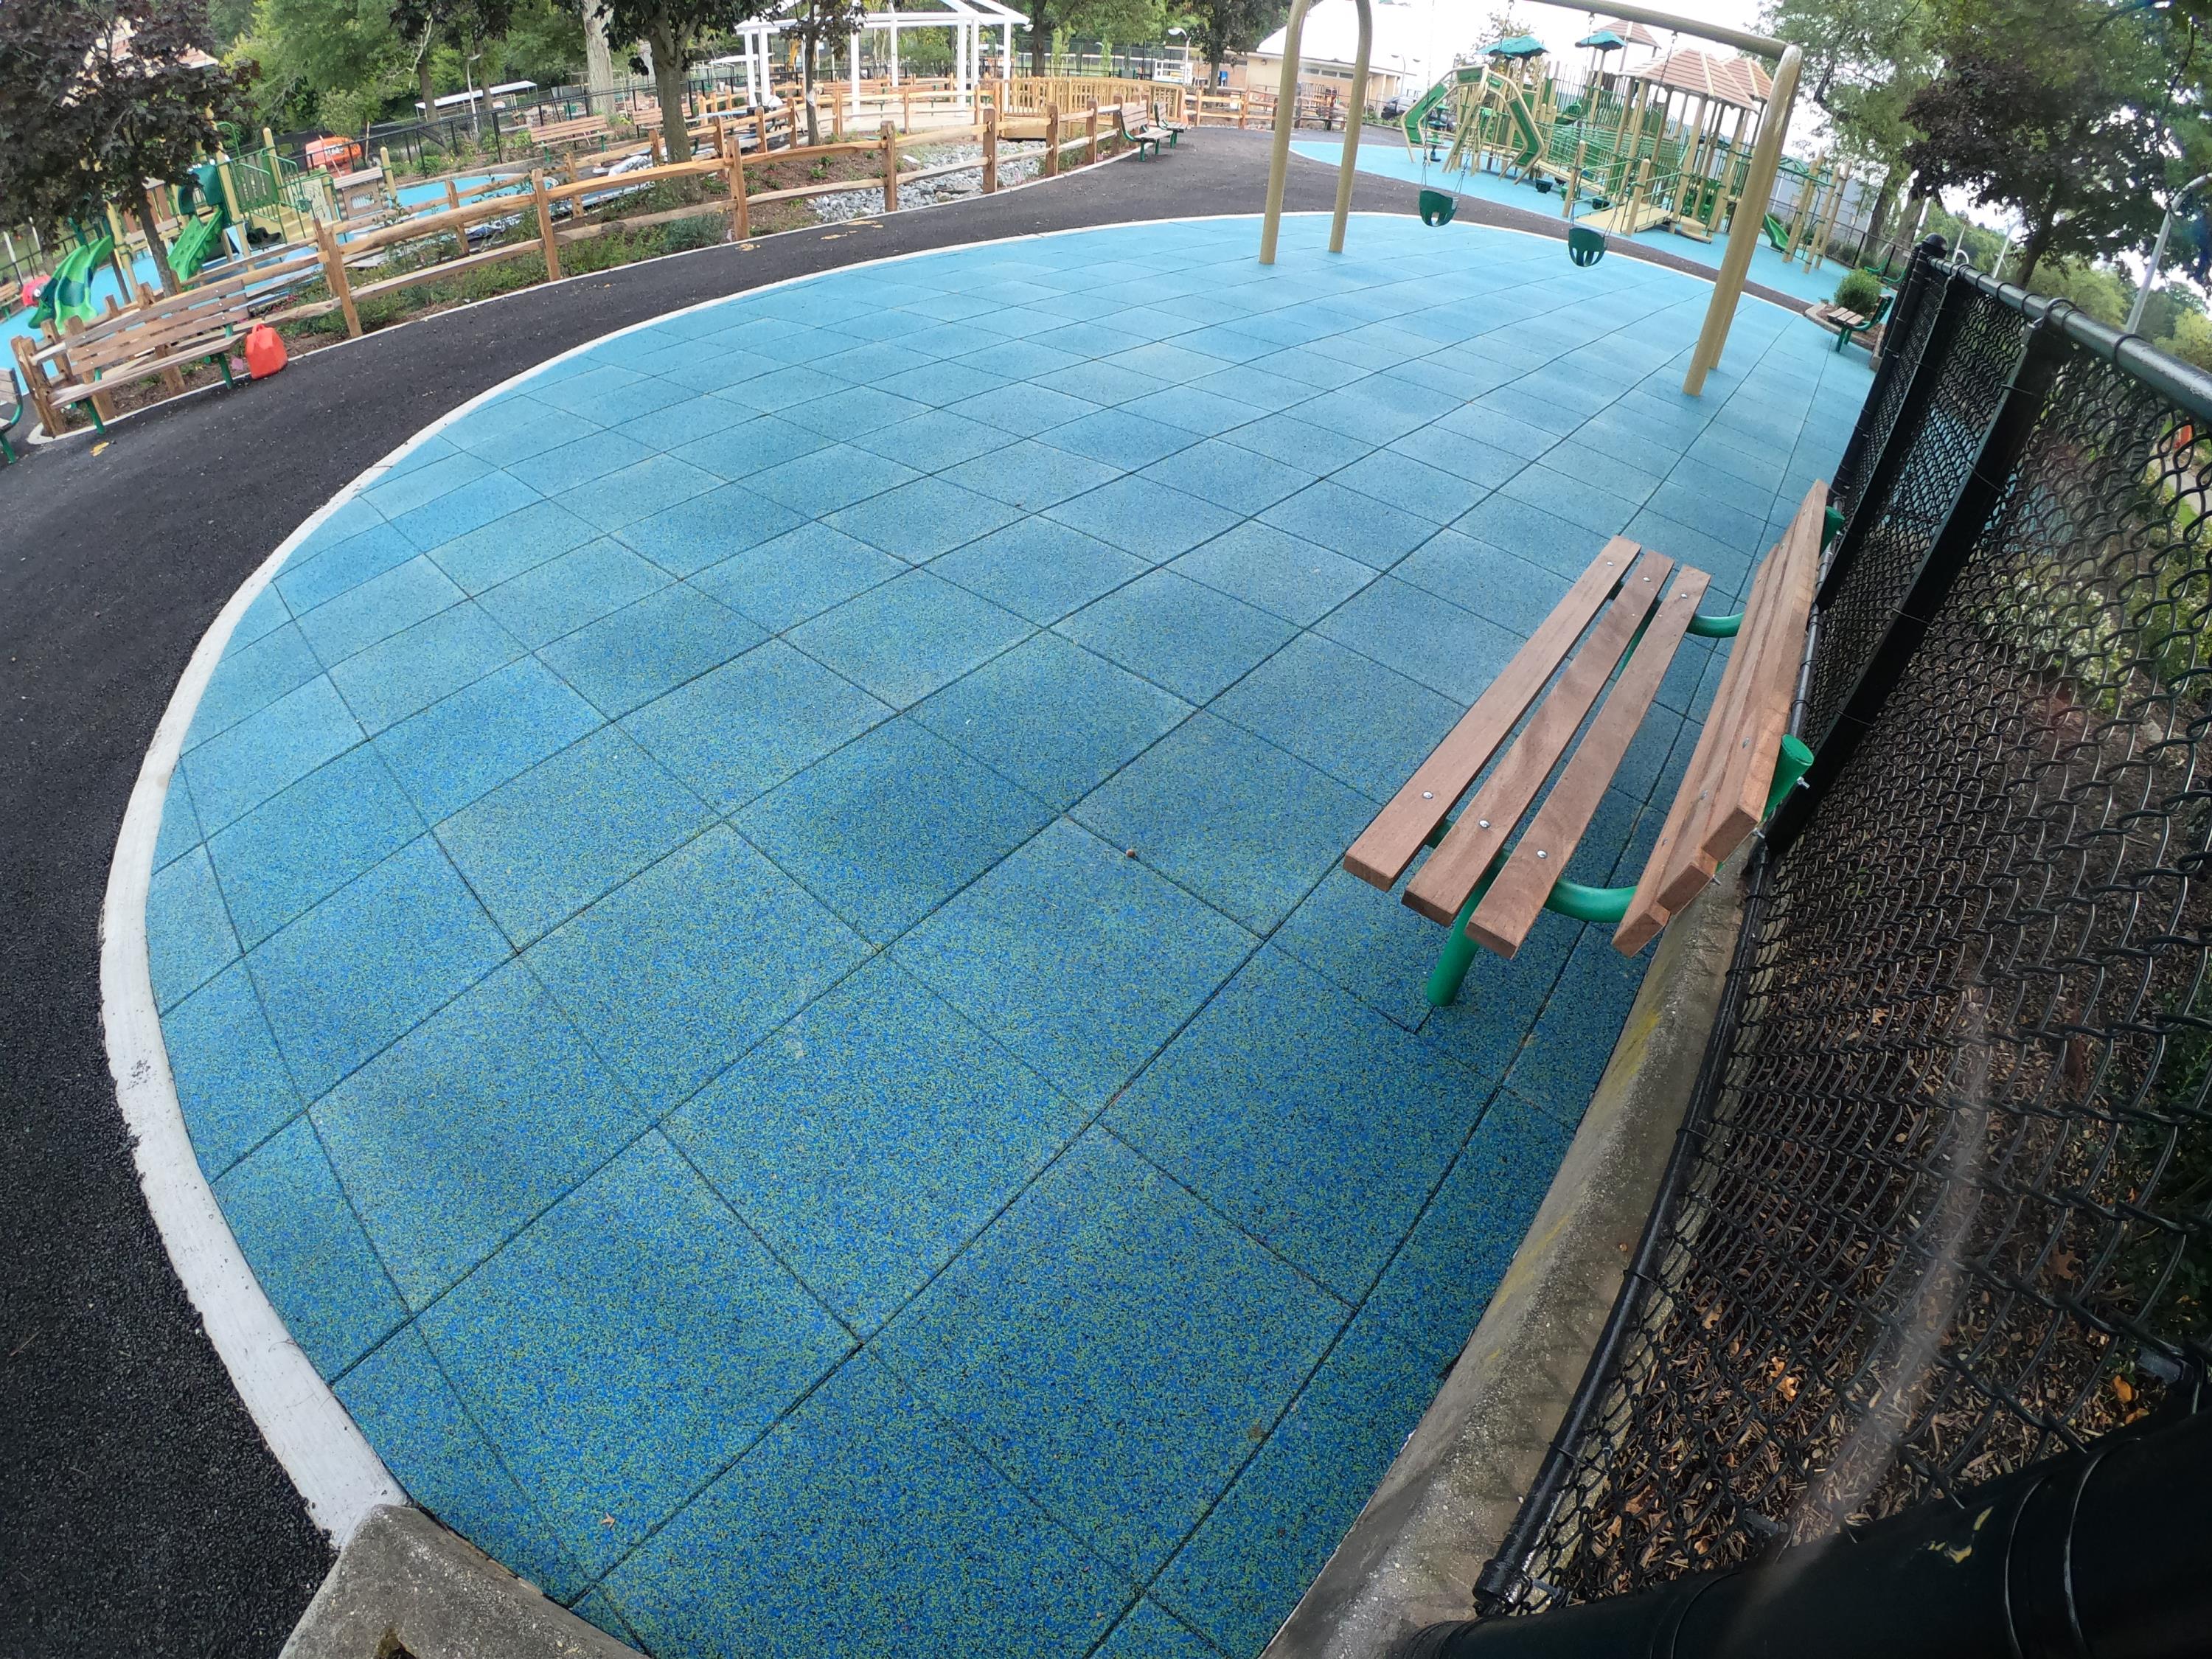 County Park Playground = Using TPV Top Tiles w50% Blue 45% Green 5% Black h